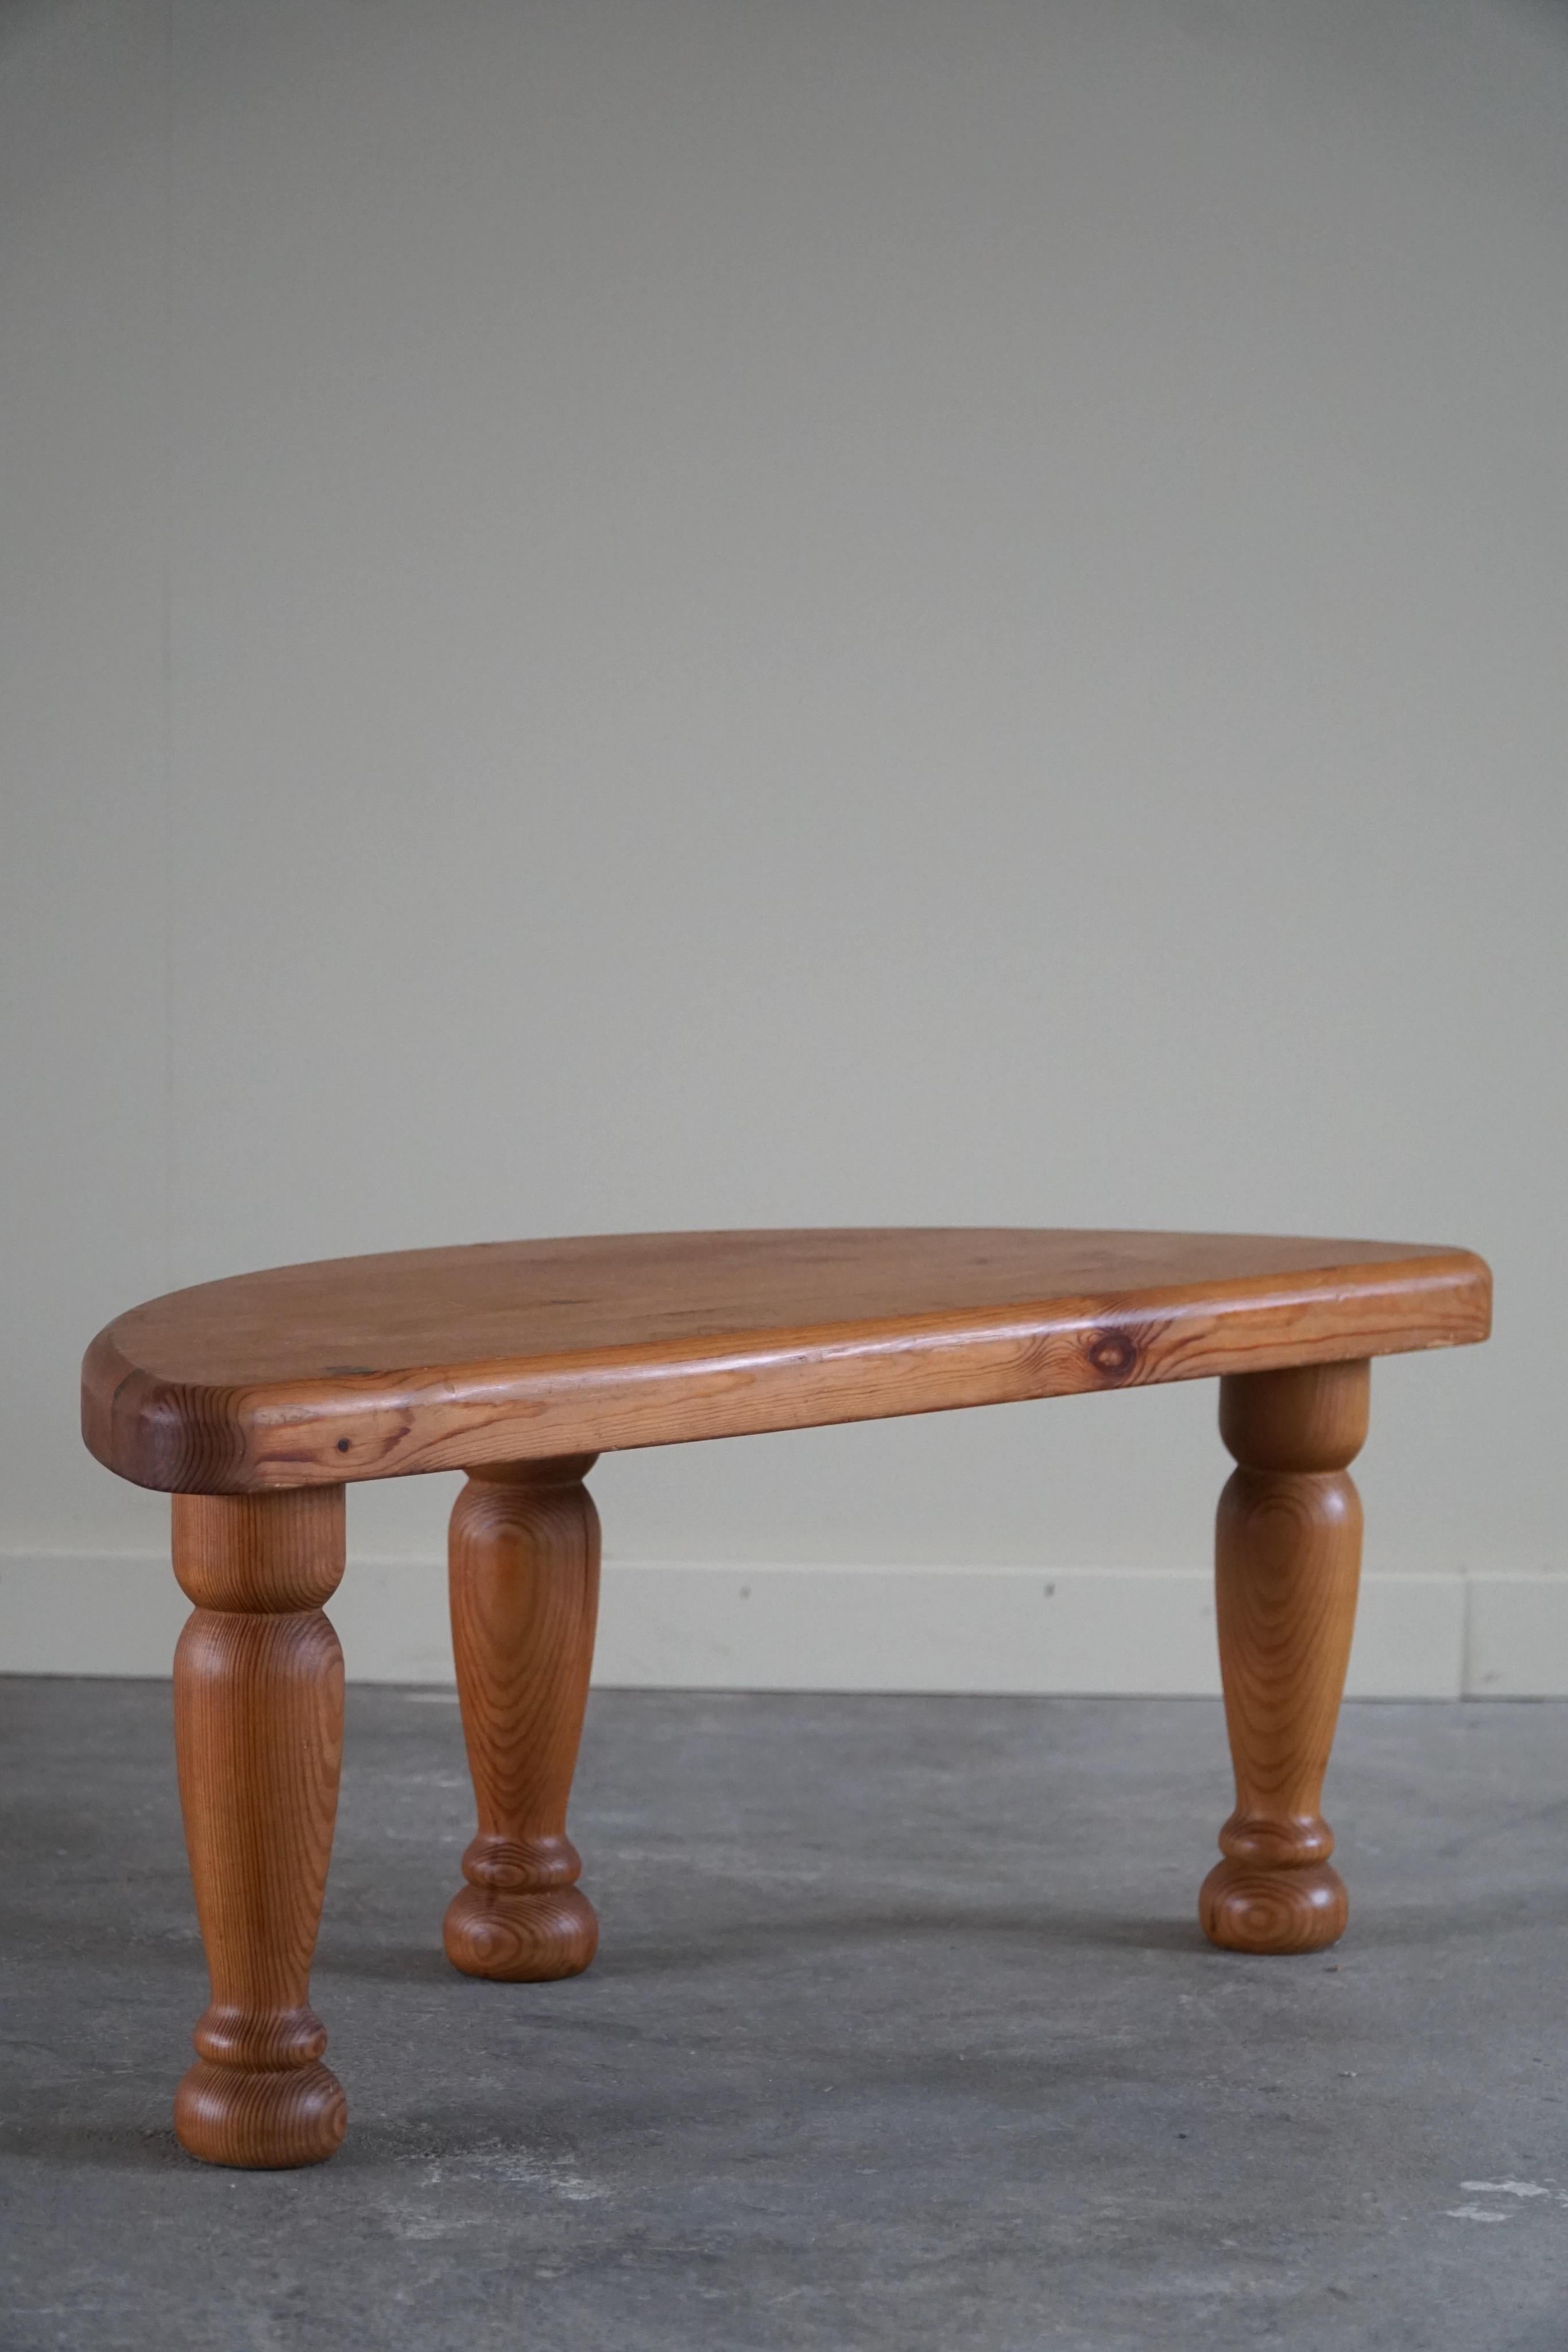 20th Century Midcentury Vintage Side Table / Tripod Stool in Solid Pine, Danish Modern, 1970